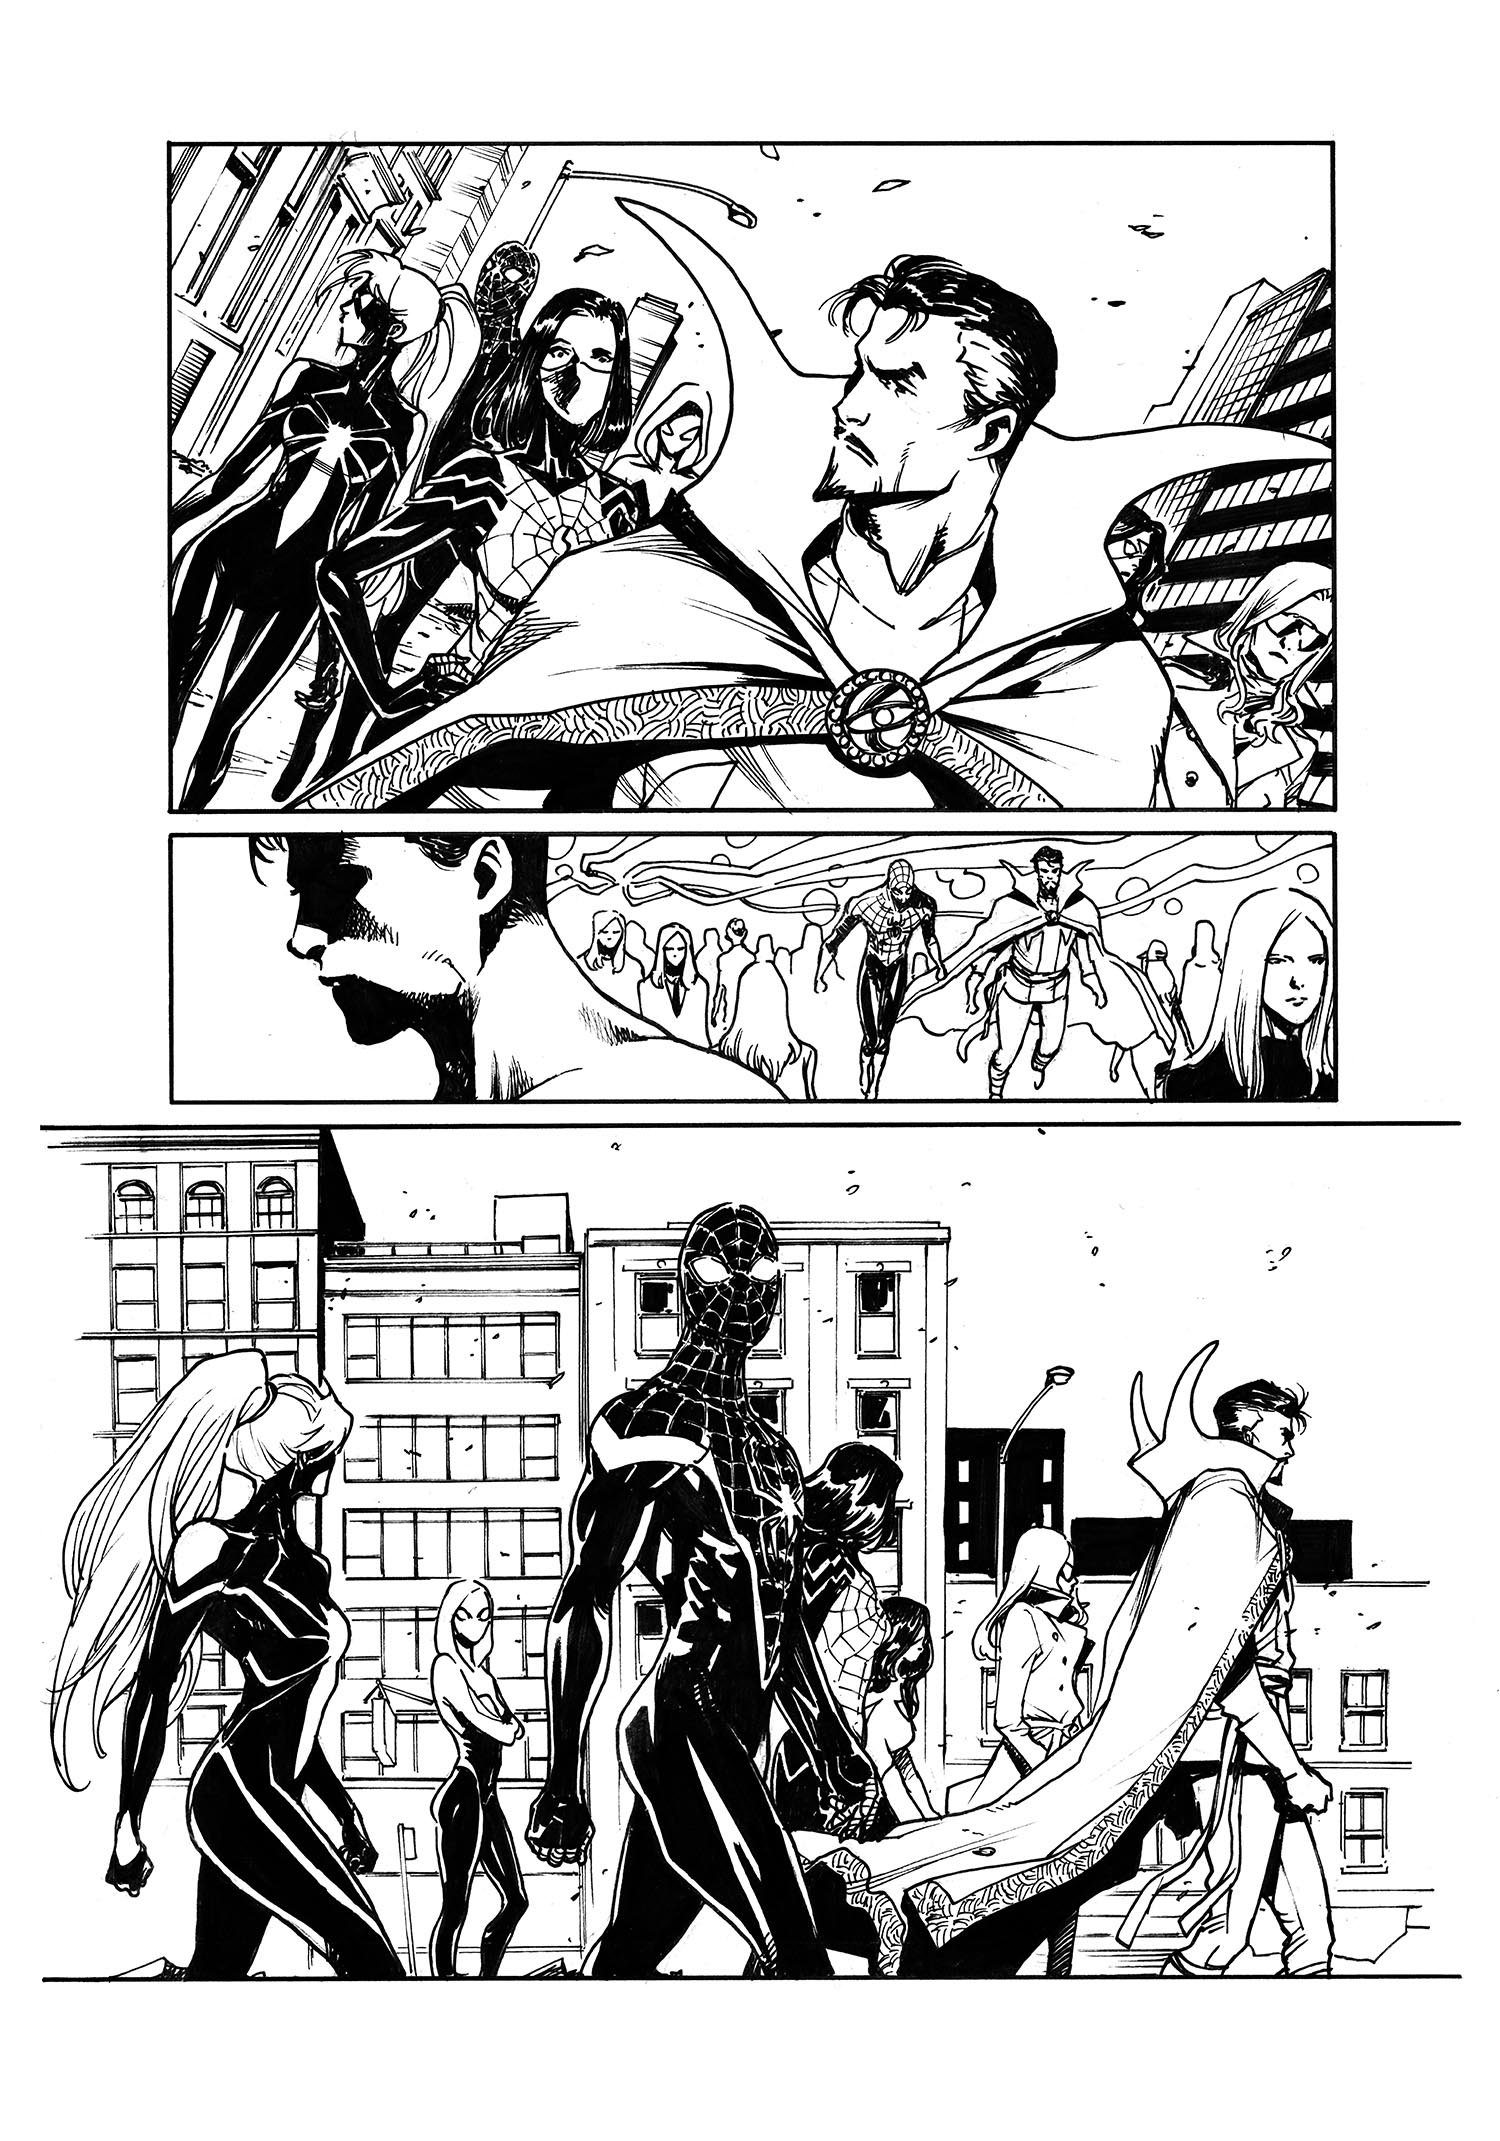 Image of Amazing Spider-man 53 Page 1 SOLD